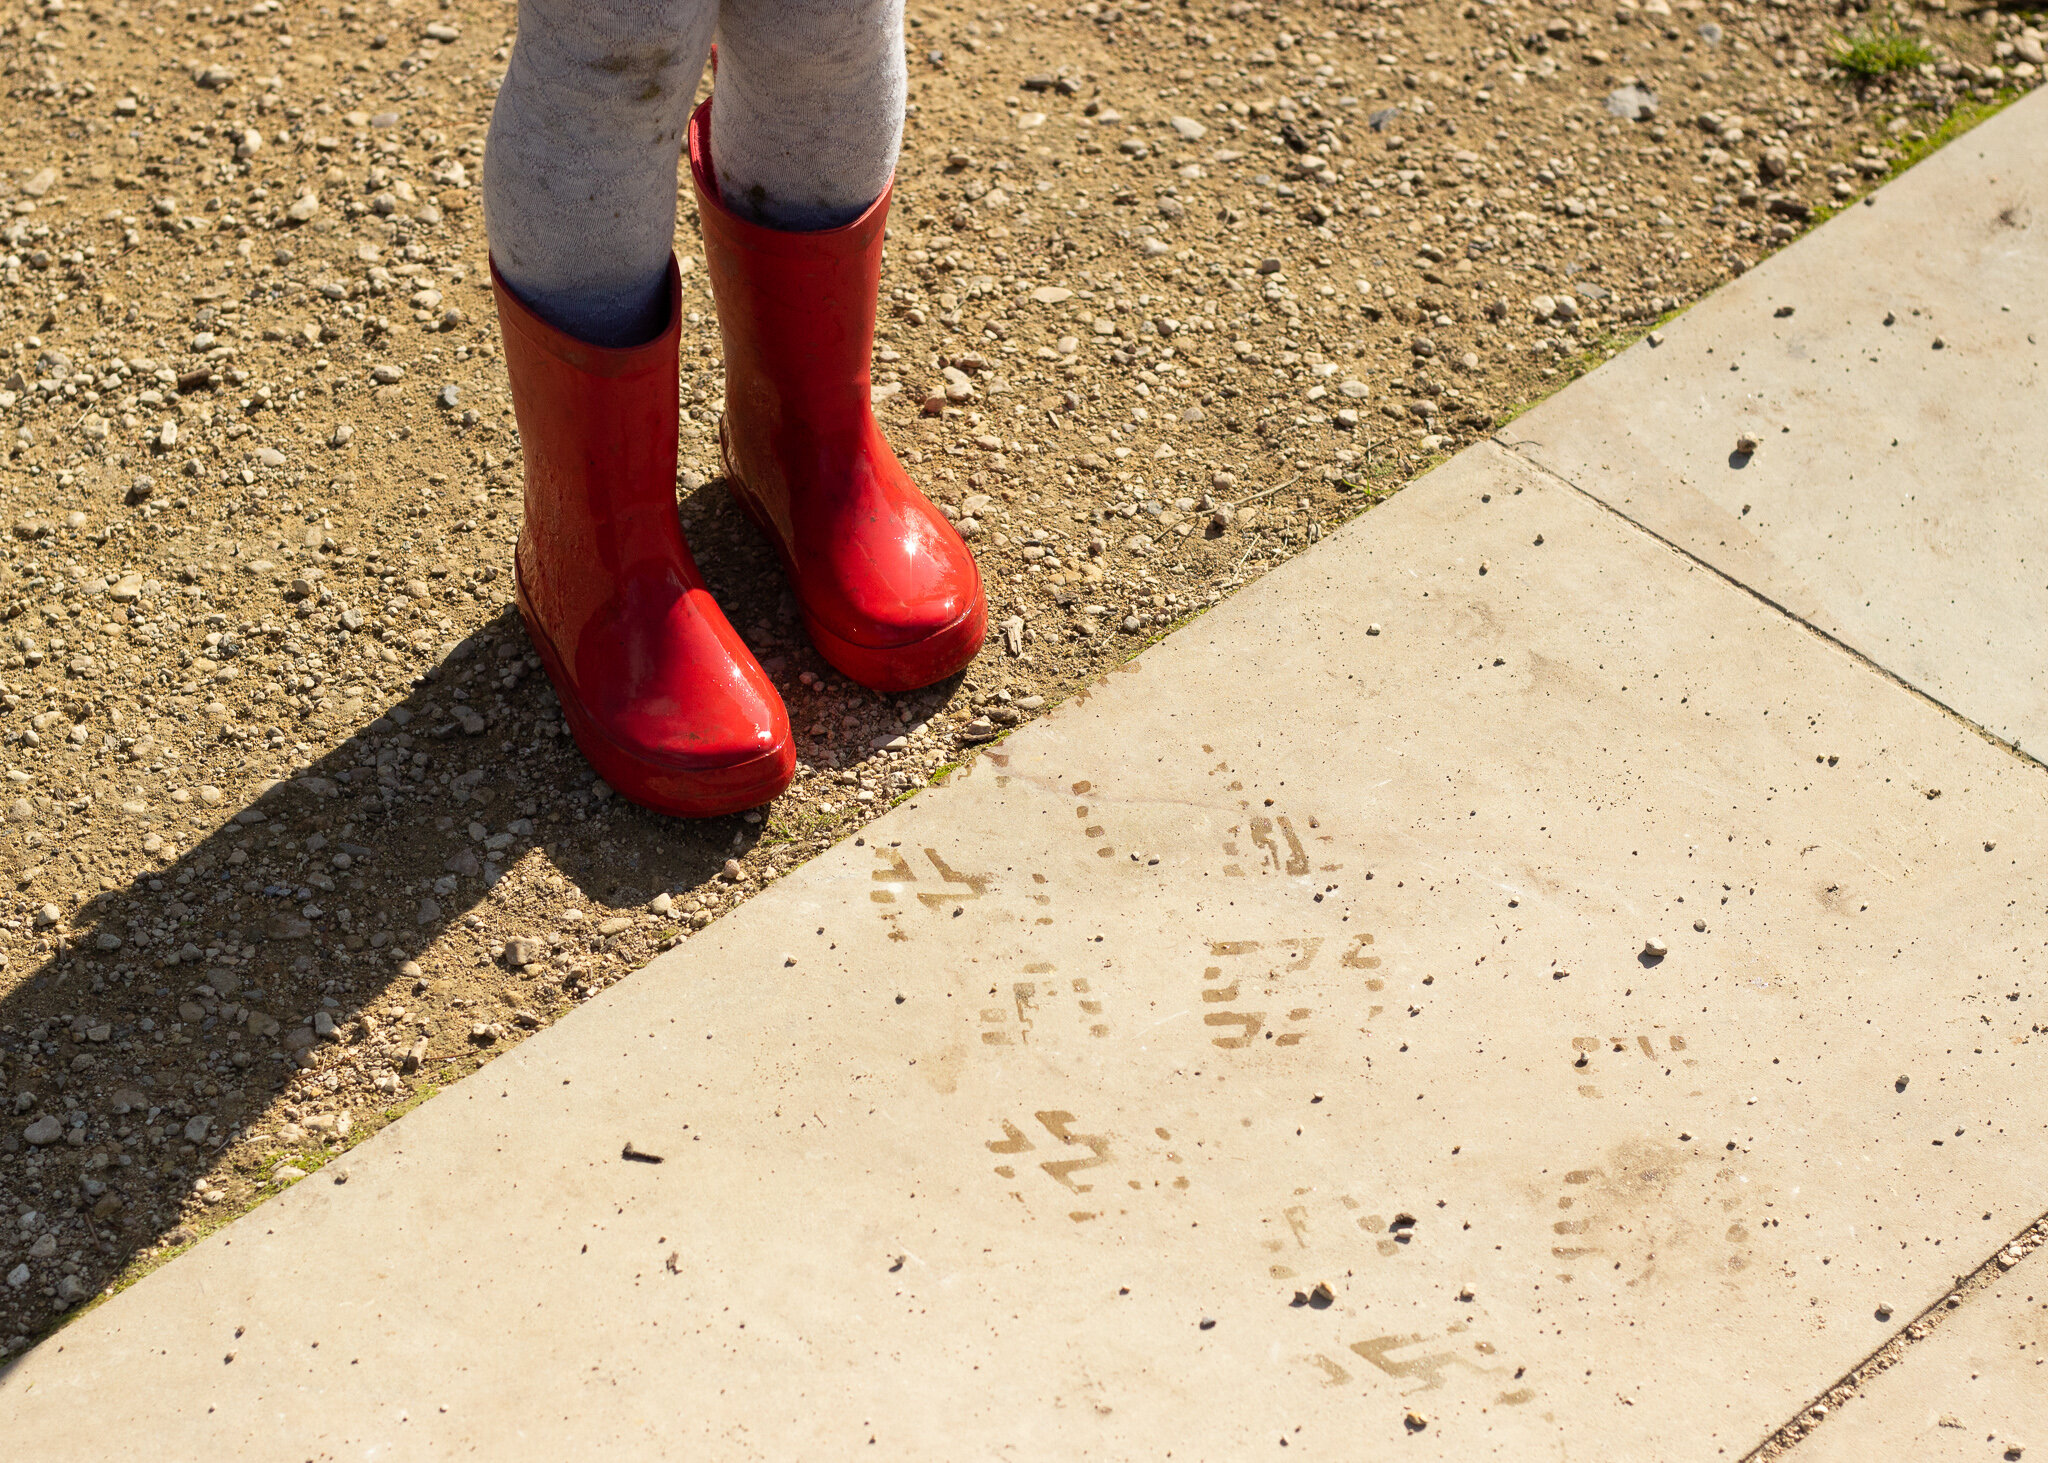 I love wellie boots and these little cute red wellies made me smile. I had to snap a quick photo during this family nature session at Kingsweston house.